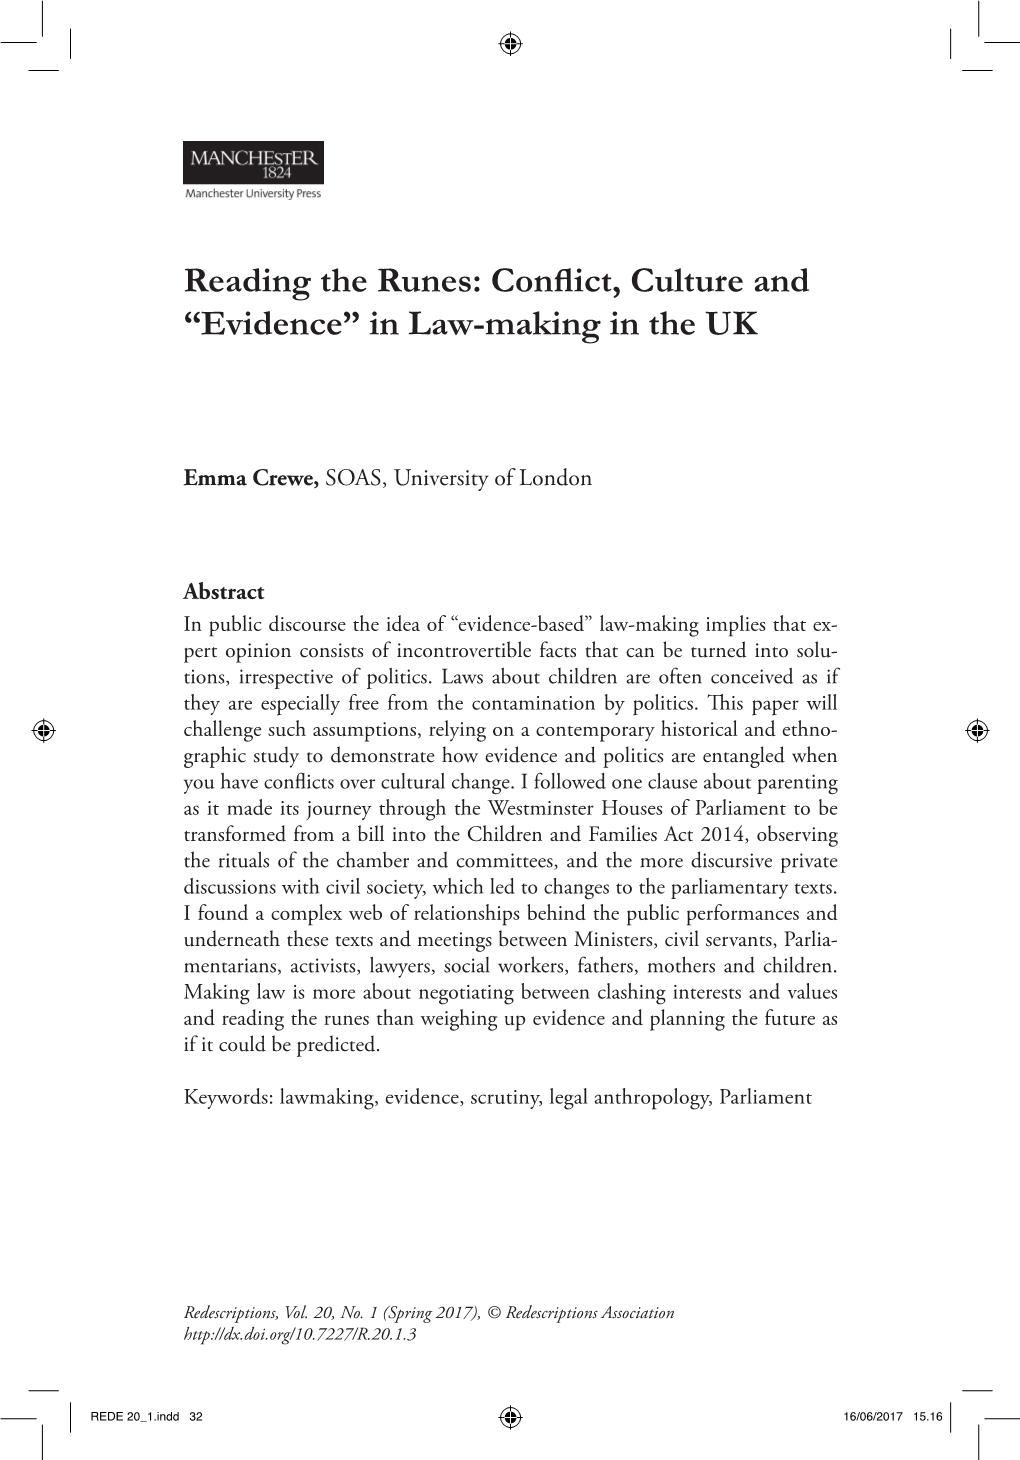 Reading the Runes: Conflict, Culture and “Evidence” in Law-Making in the UK